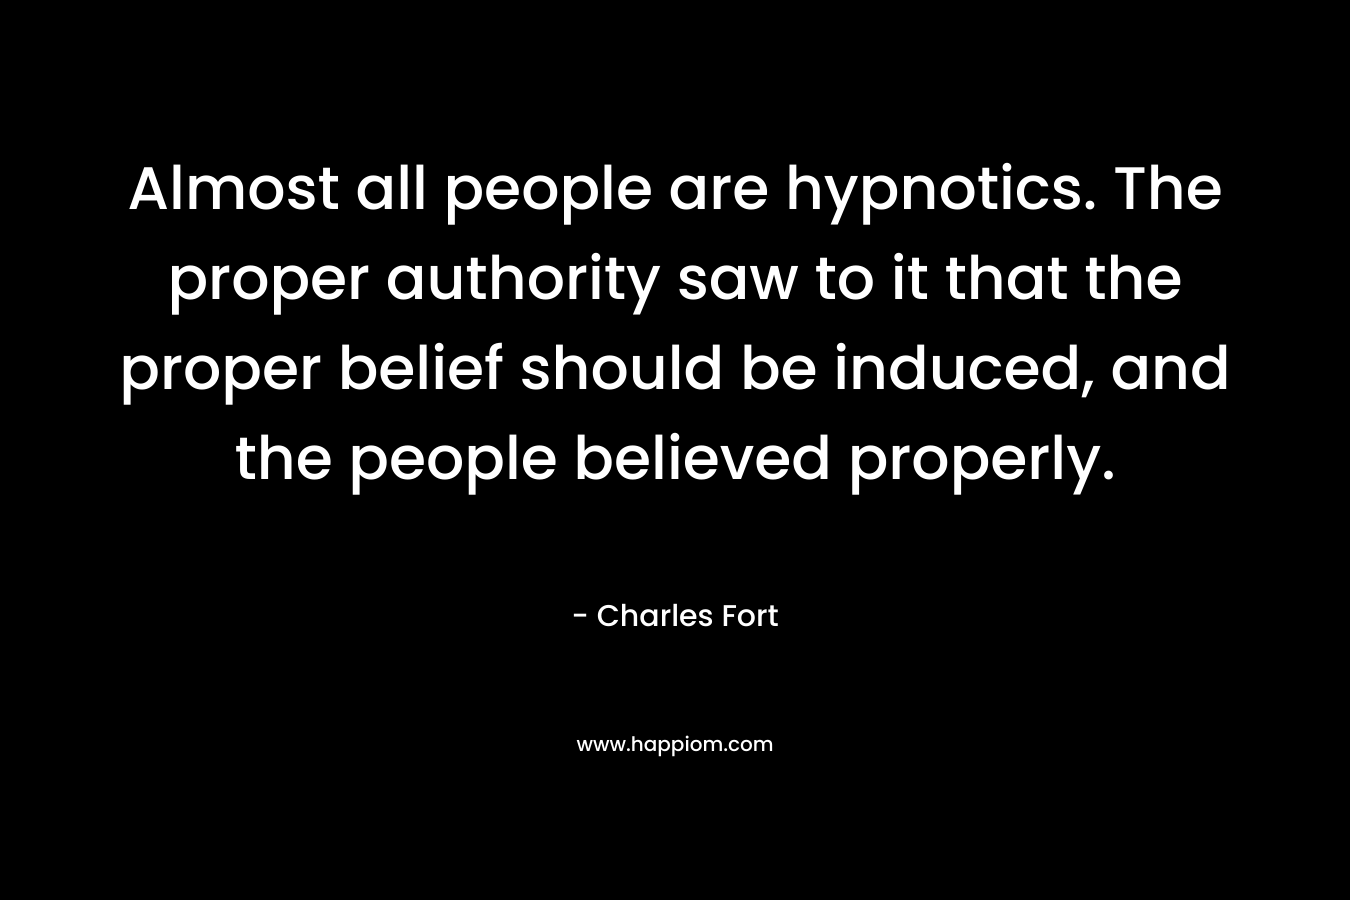 Almost all people are hypnotics. The proper authority saw to it that the proper belief should be induced, and the people believed properly.